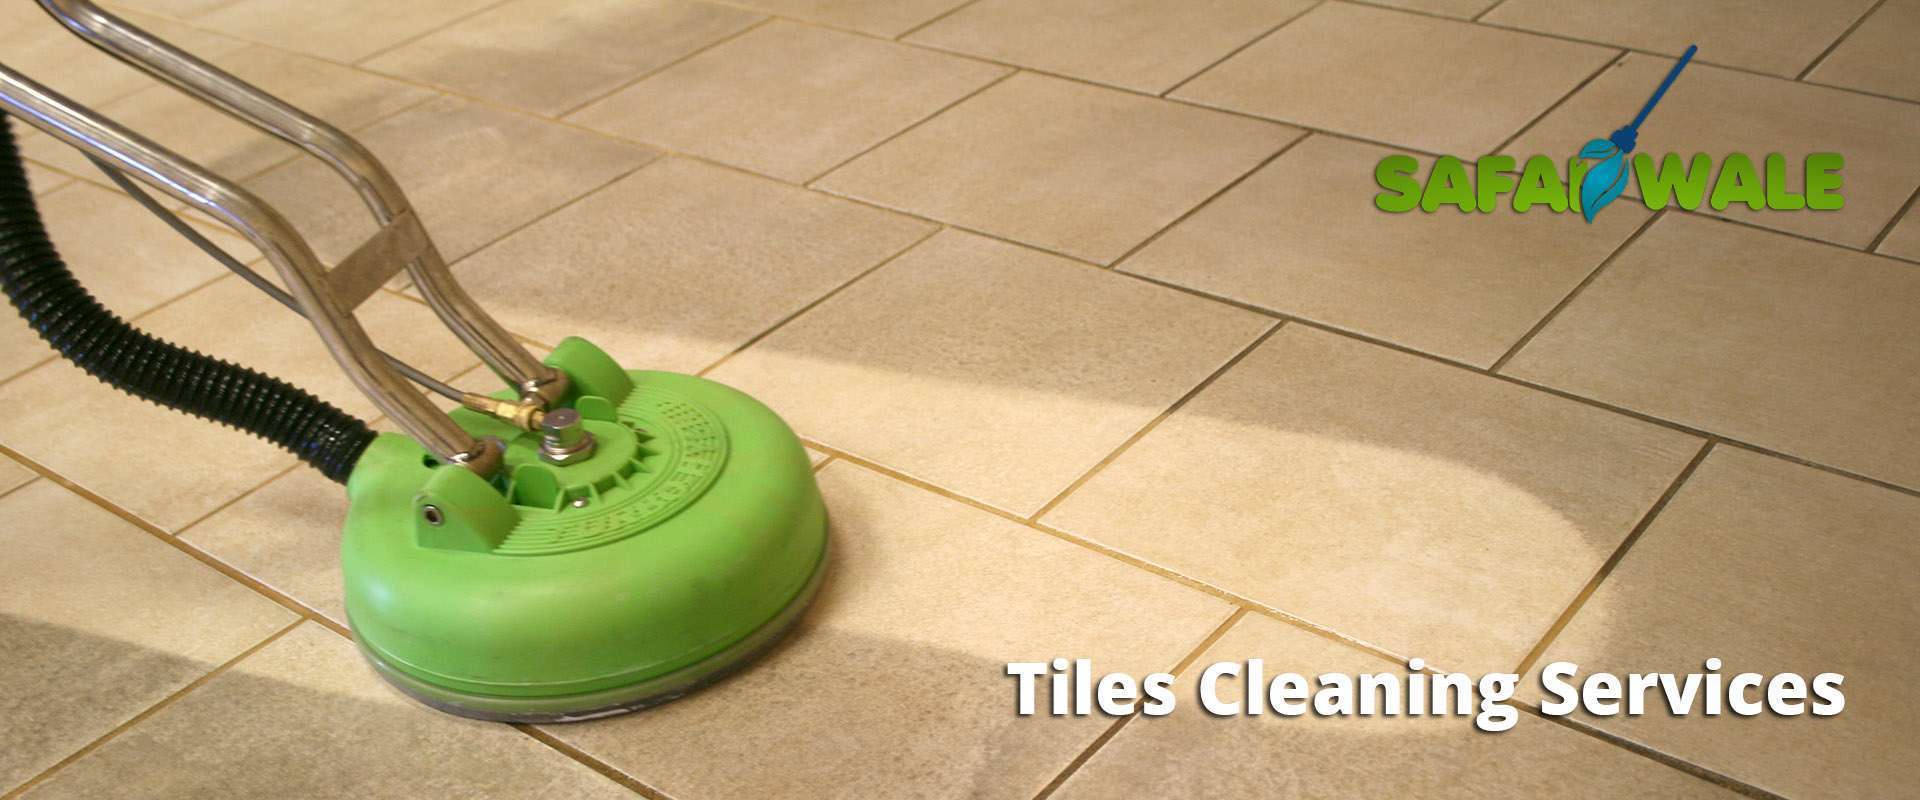 Tiles Cleaning Services In Ghaziabad